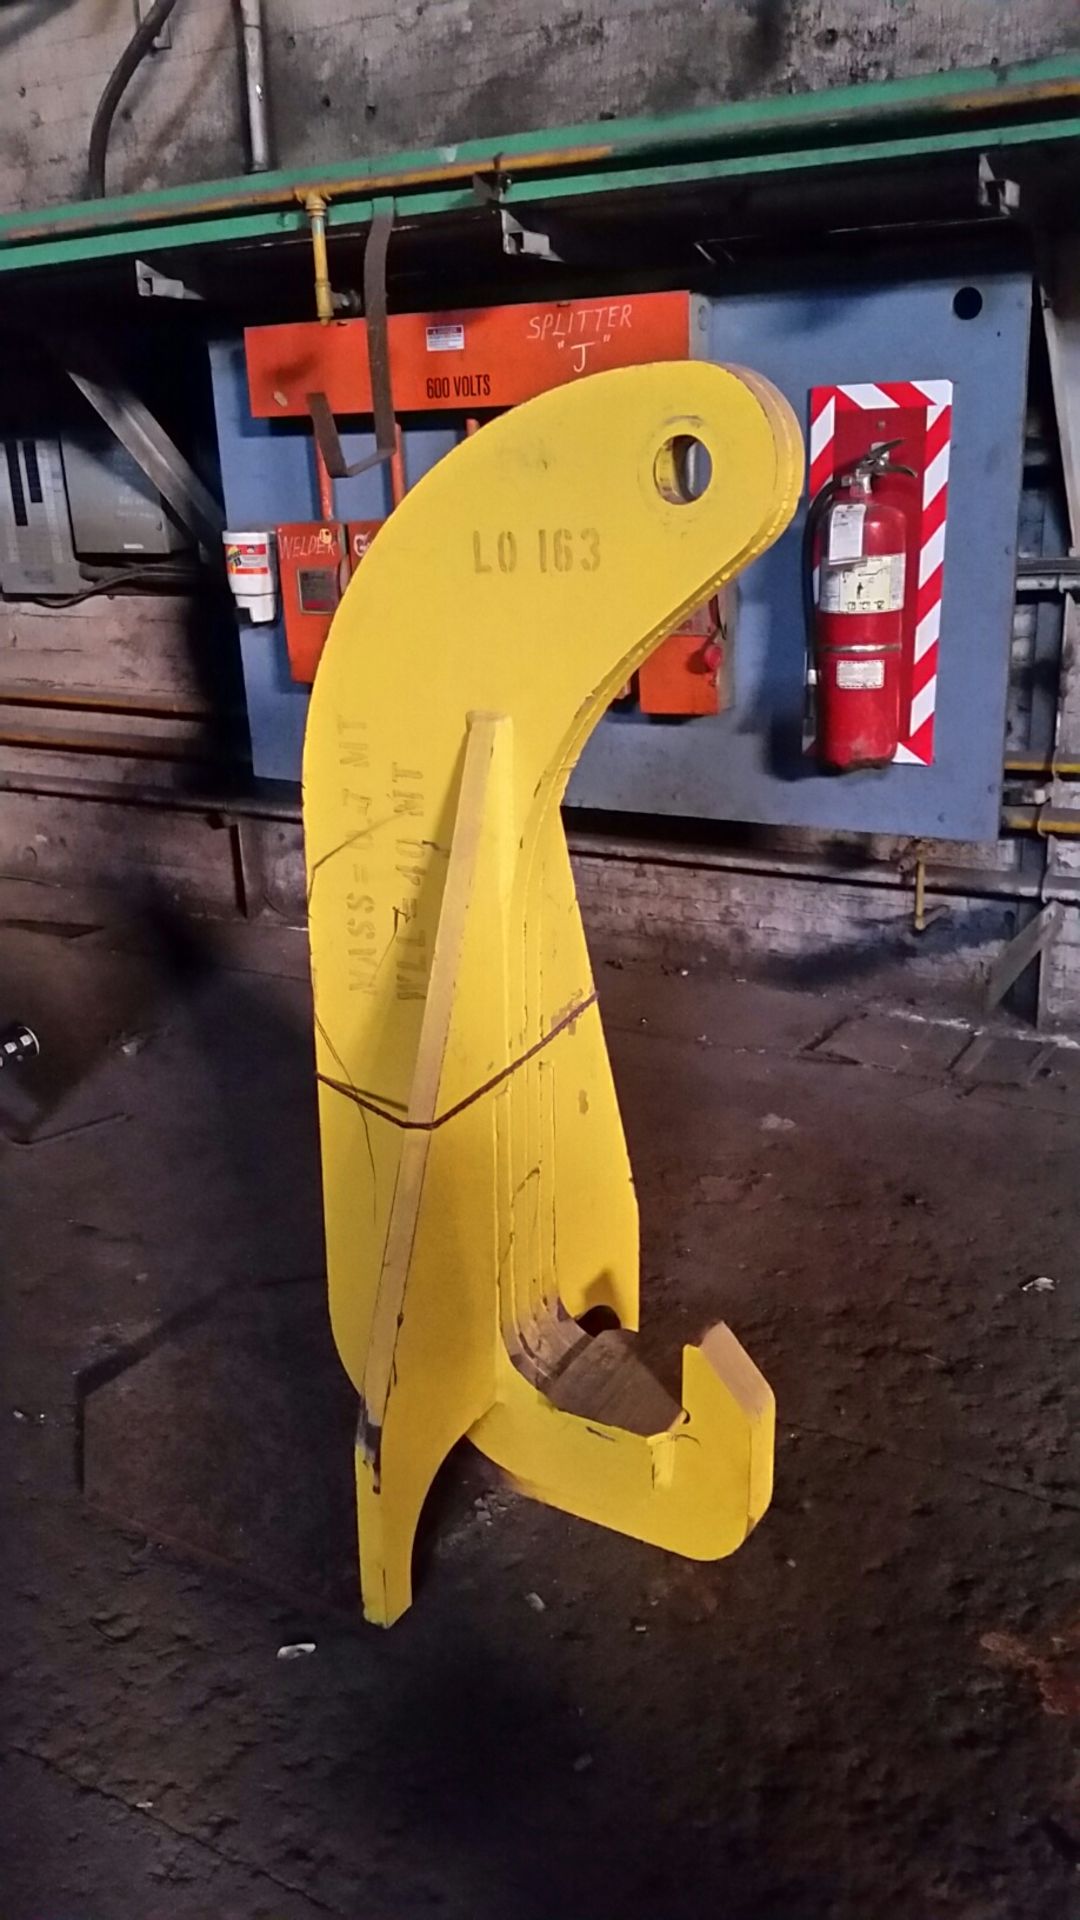 L0163 C-TYPE LIFTING HOOK WITH 40 TON CAPACITY